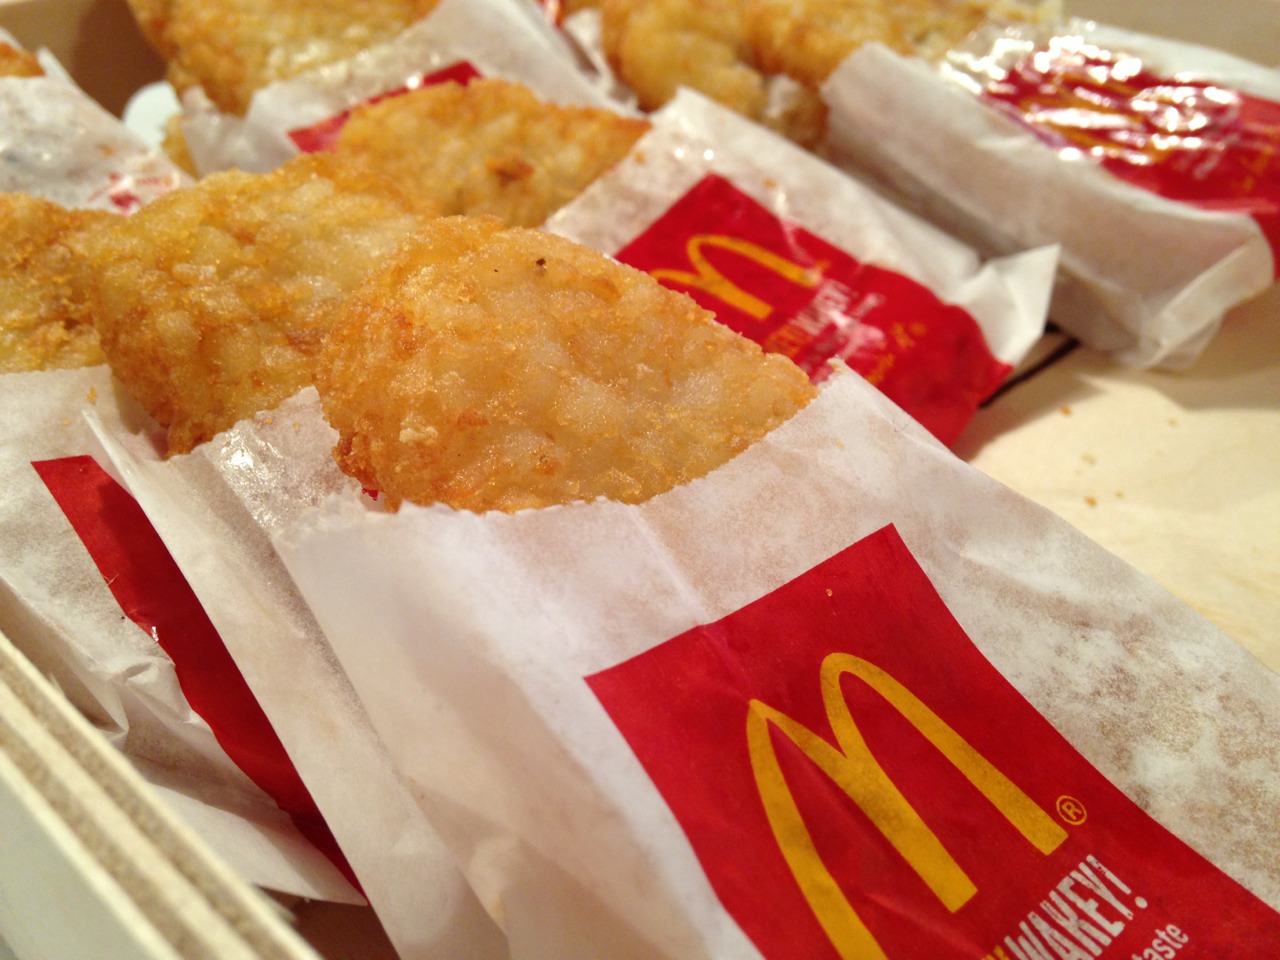 🍔 Take This “Scale of 1 to 5” McDonald’s Quiz and We’ll Guess Your Age Accurately Hash Browns